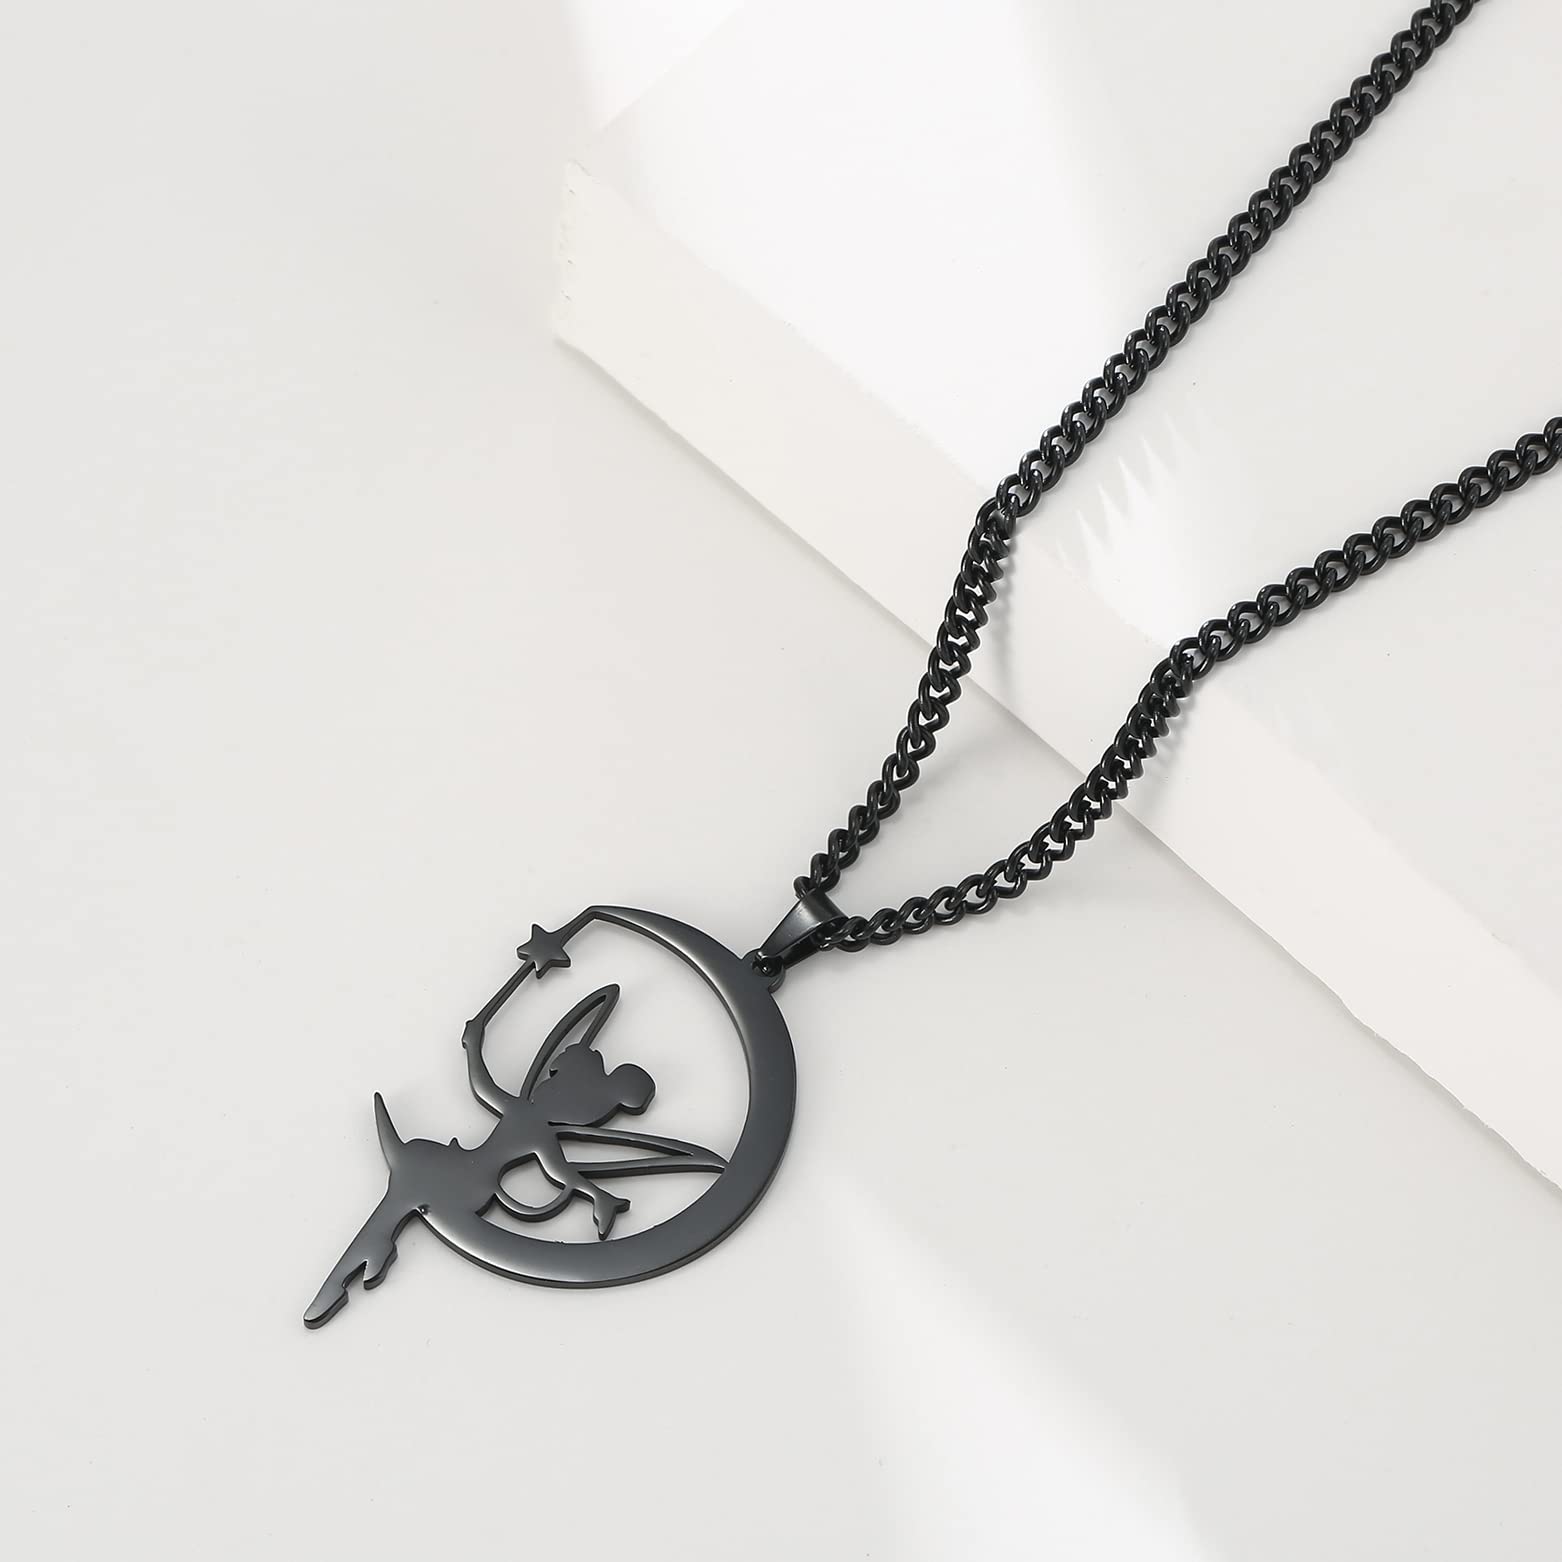 EUEAVAN Moon Wendy Princess Tinker Bell Pendant Necklace Dainty Fairy Pixie Angel Holding Magic Wand Choker Magic Trendy Dancer Ballet Jewelry Fairy Tale Story Quote Girl Woman Teens